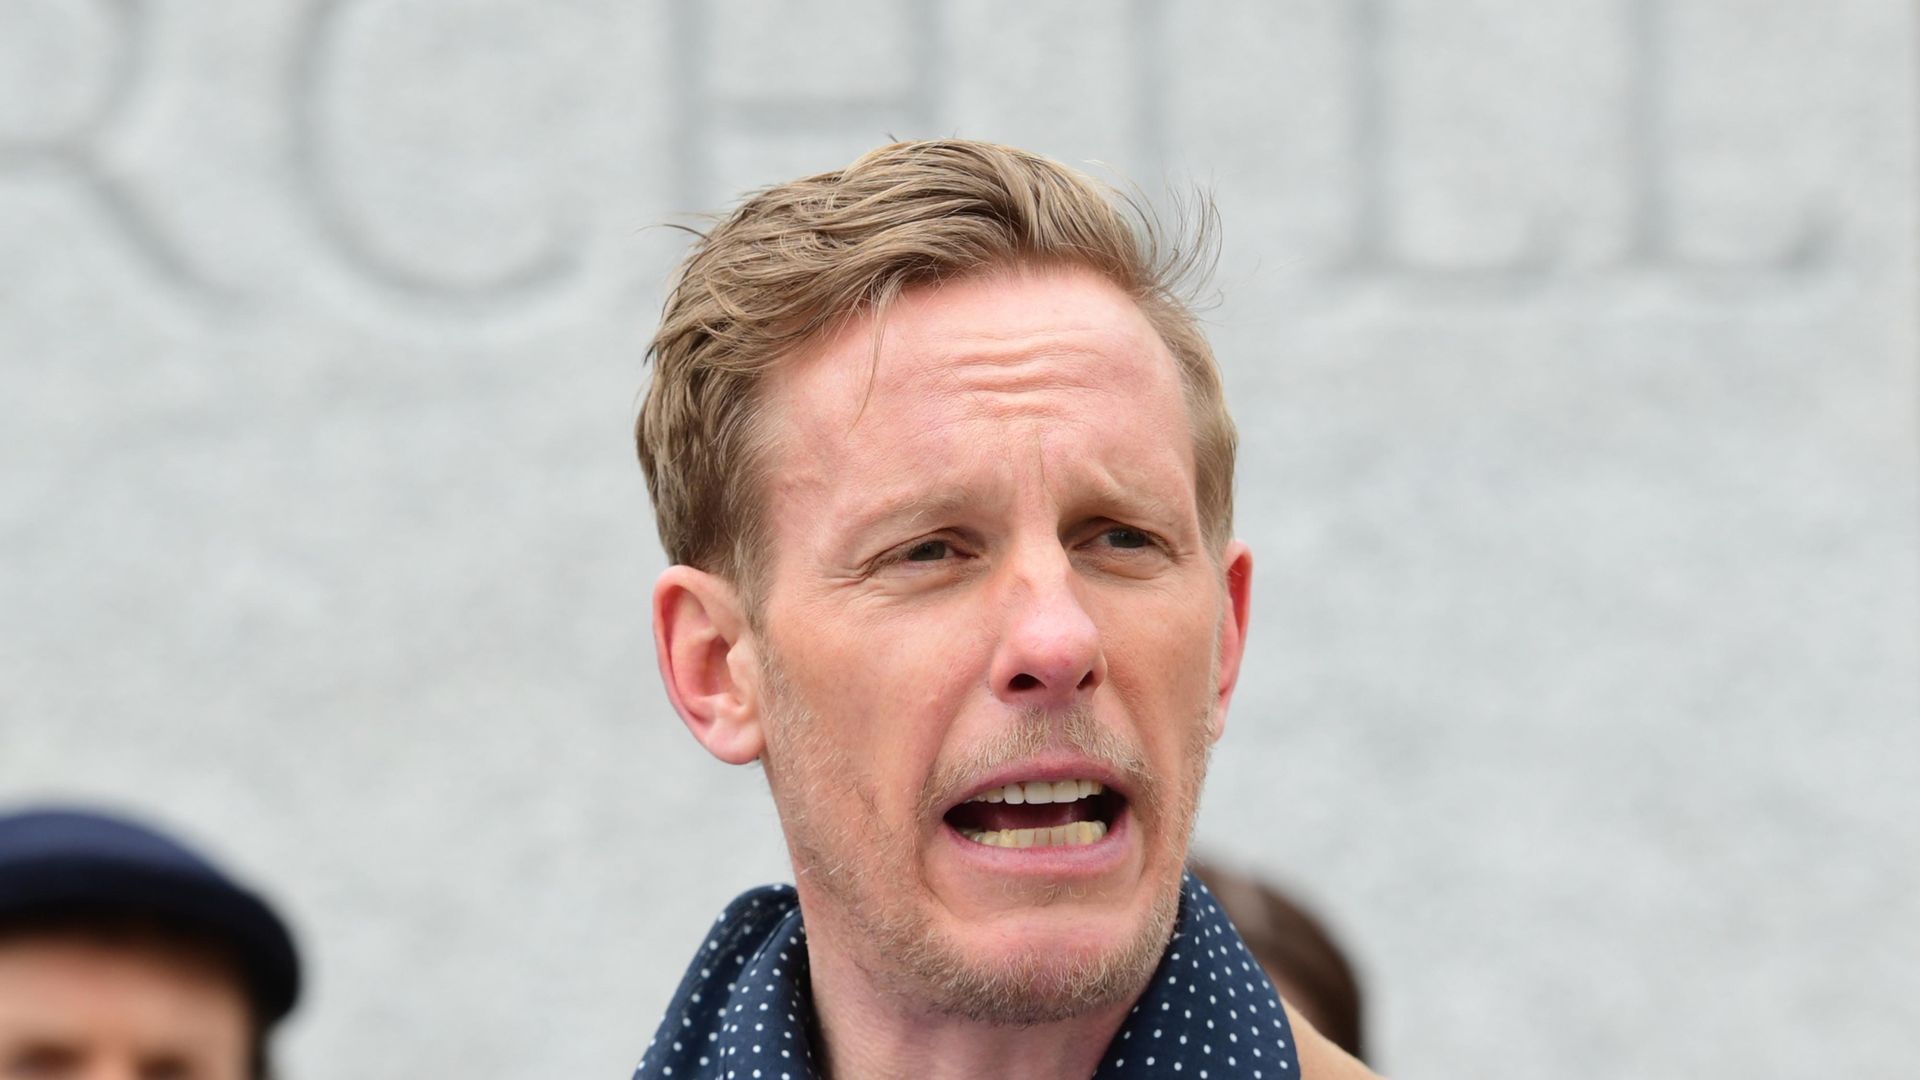 Leader of the Reclaim Party, Laurence Fox, at the launch of their party manifesto for the London Mayoral election, in Parliament Square, Westminster, central London - Credit: PA